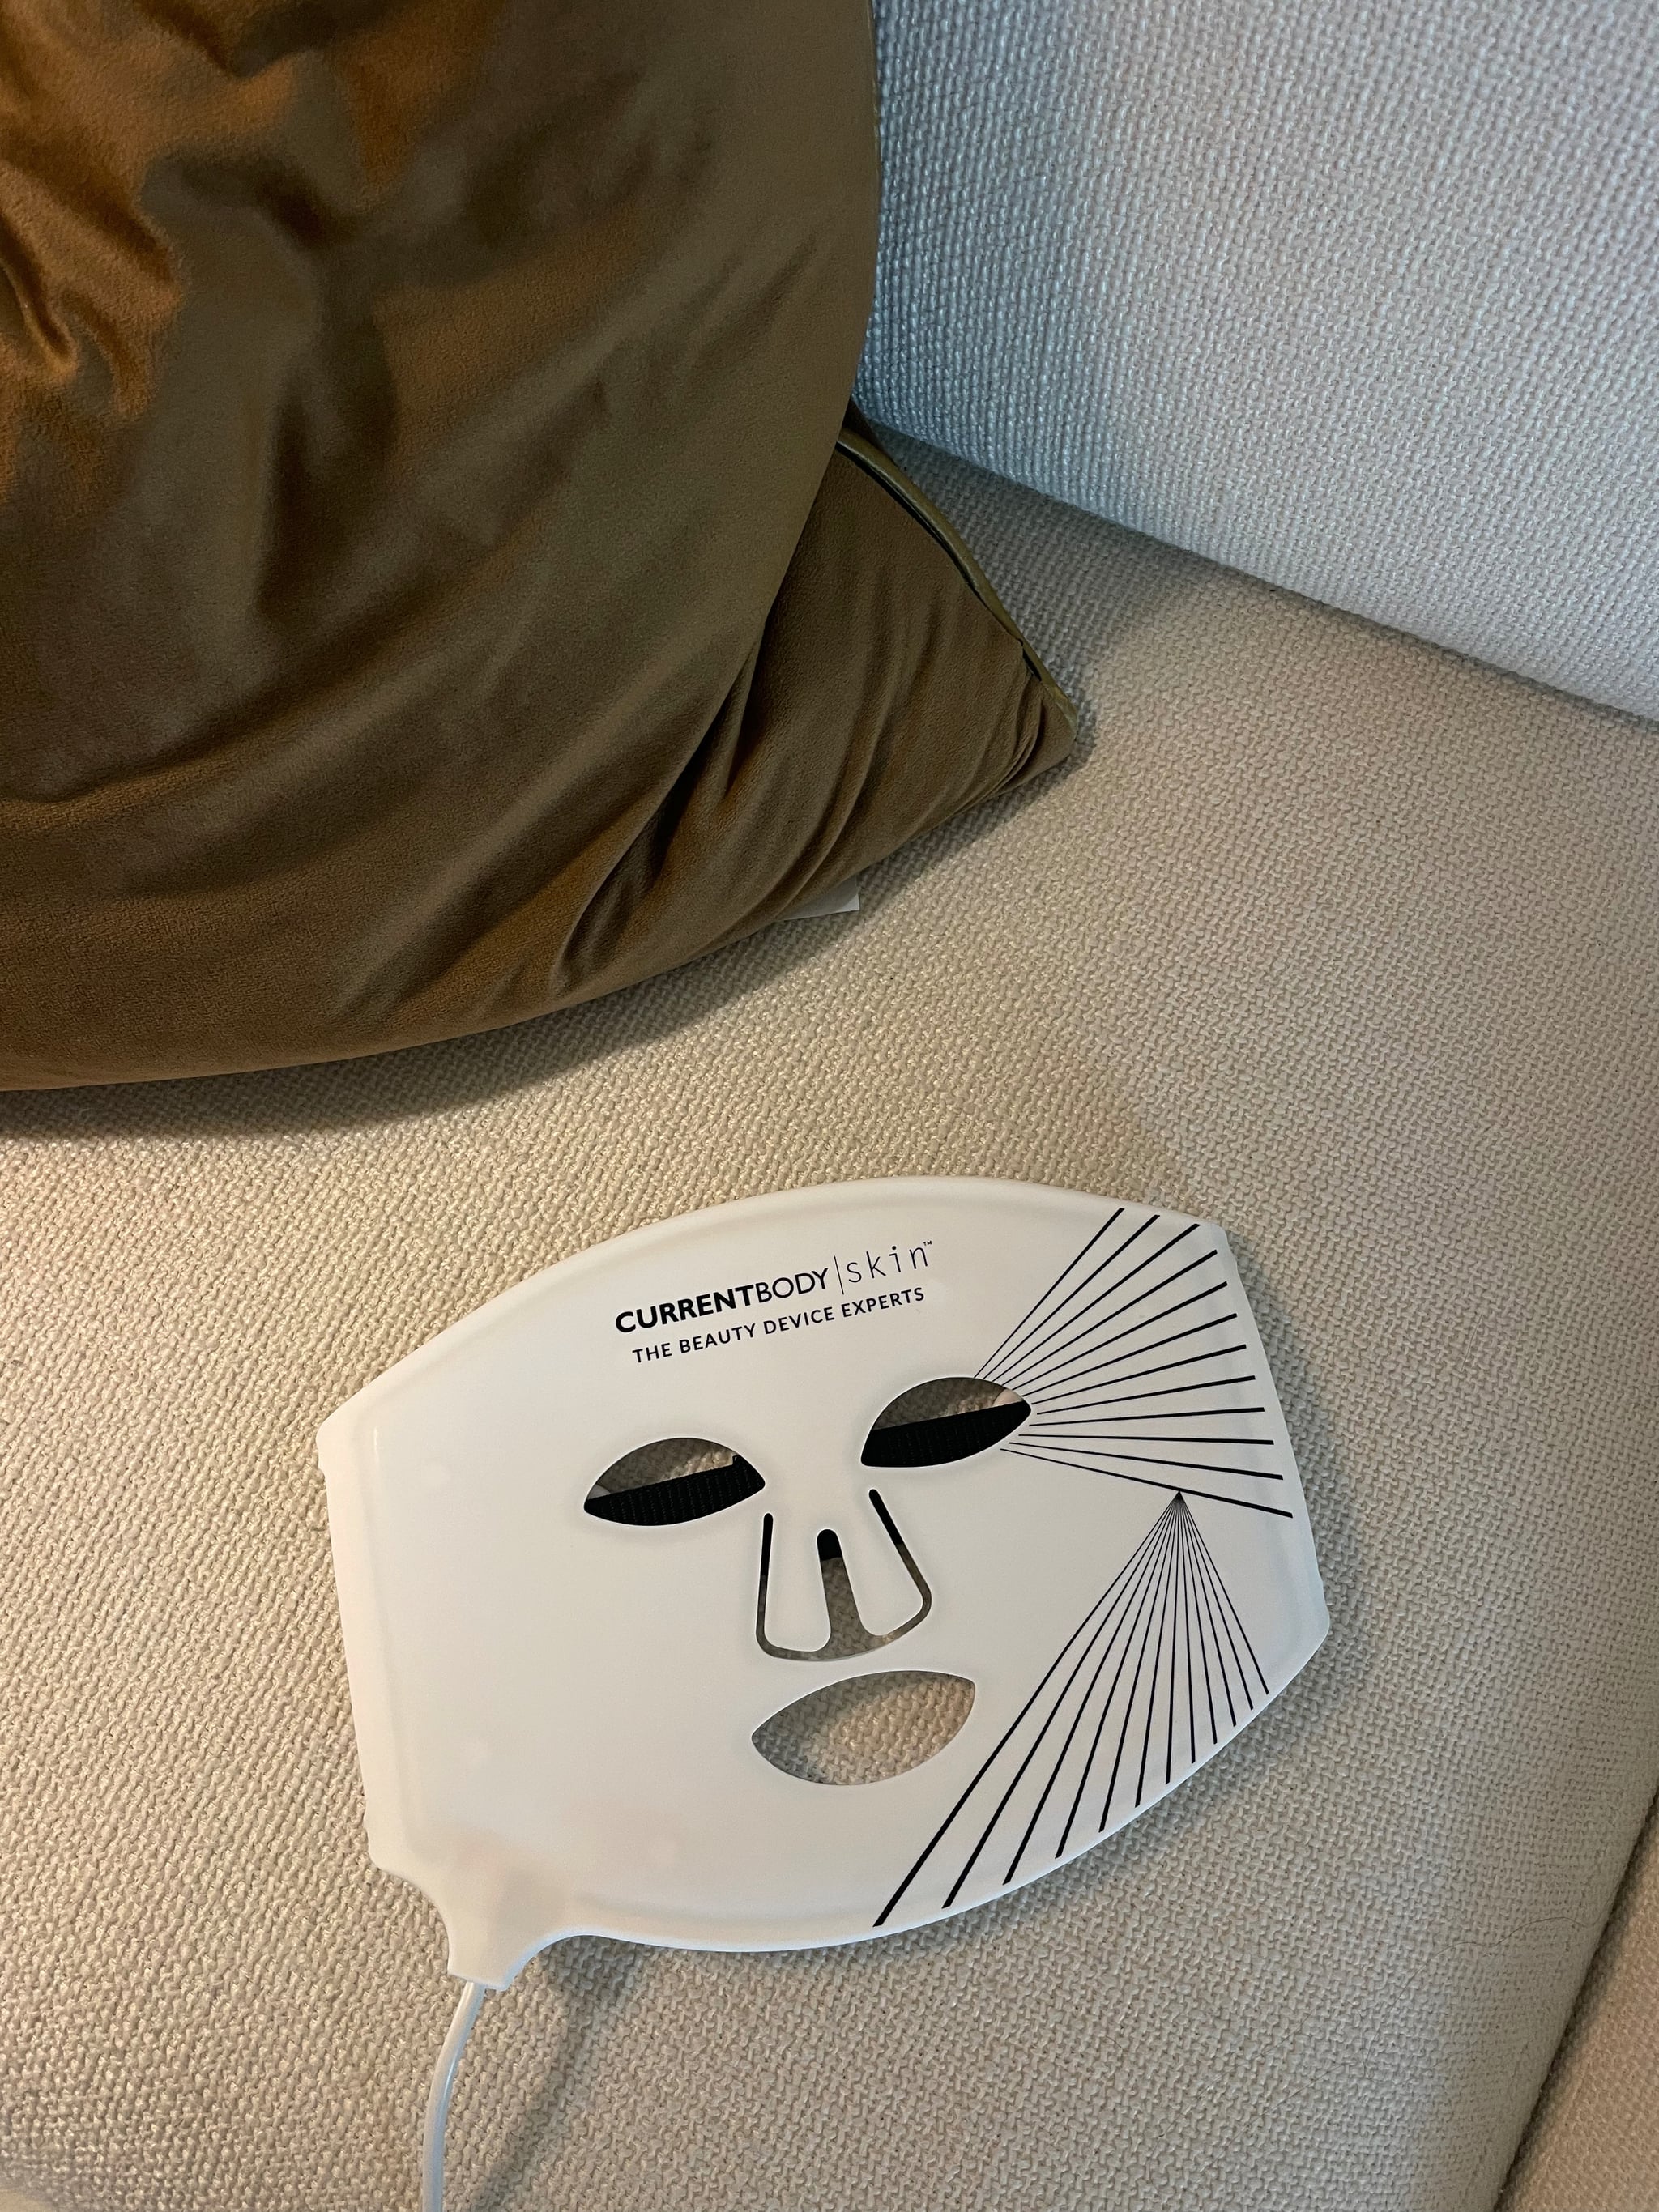 CurrentBody Skin LED Light Therapy Face Mask Review